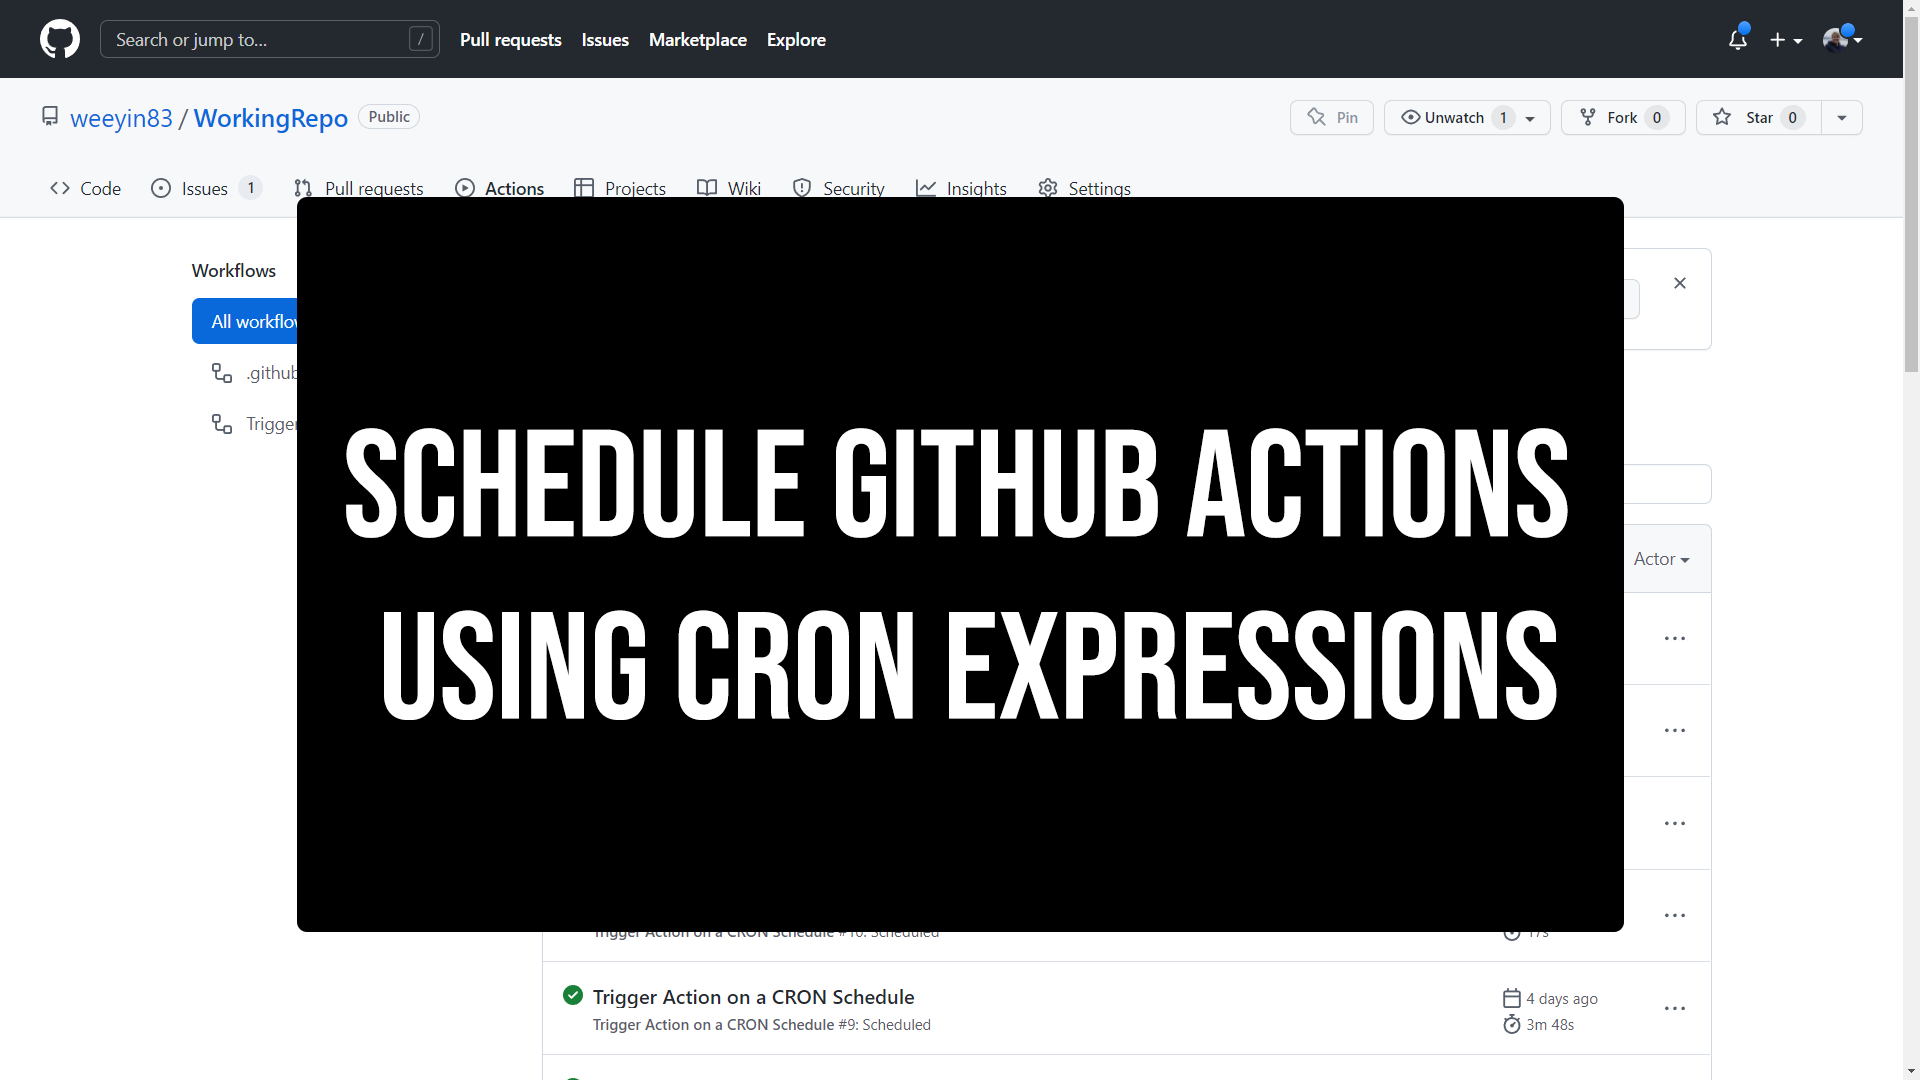 Schedule GitHub Actions Using CRON Expressions